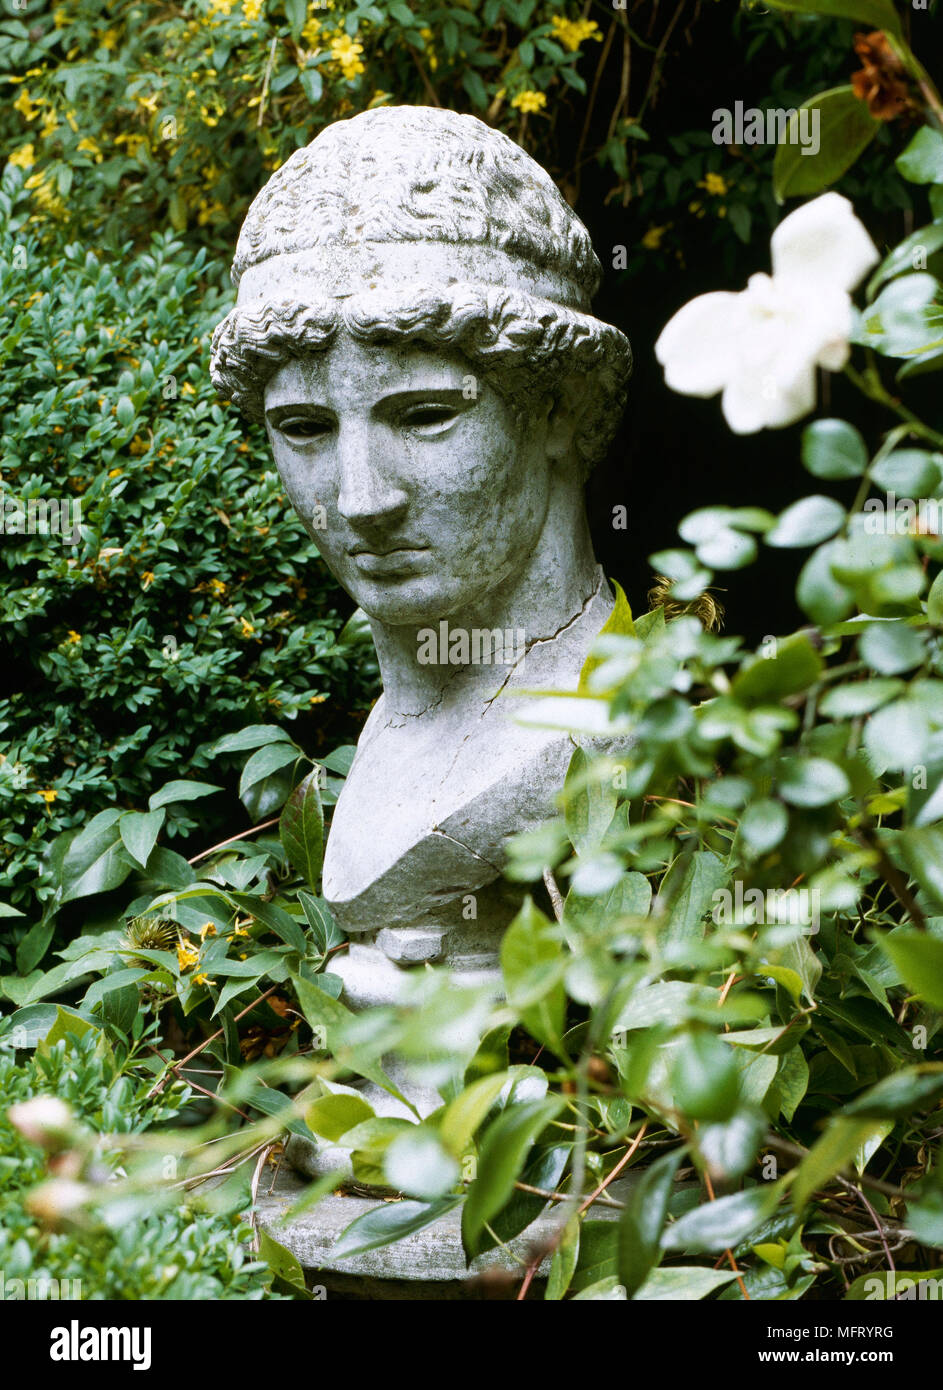 Stone figure head statue set in shrubbery  stautes features busts Stock Photo